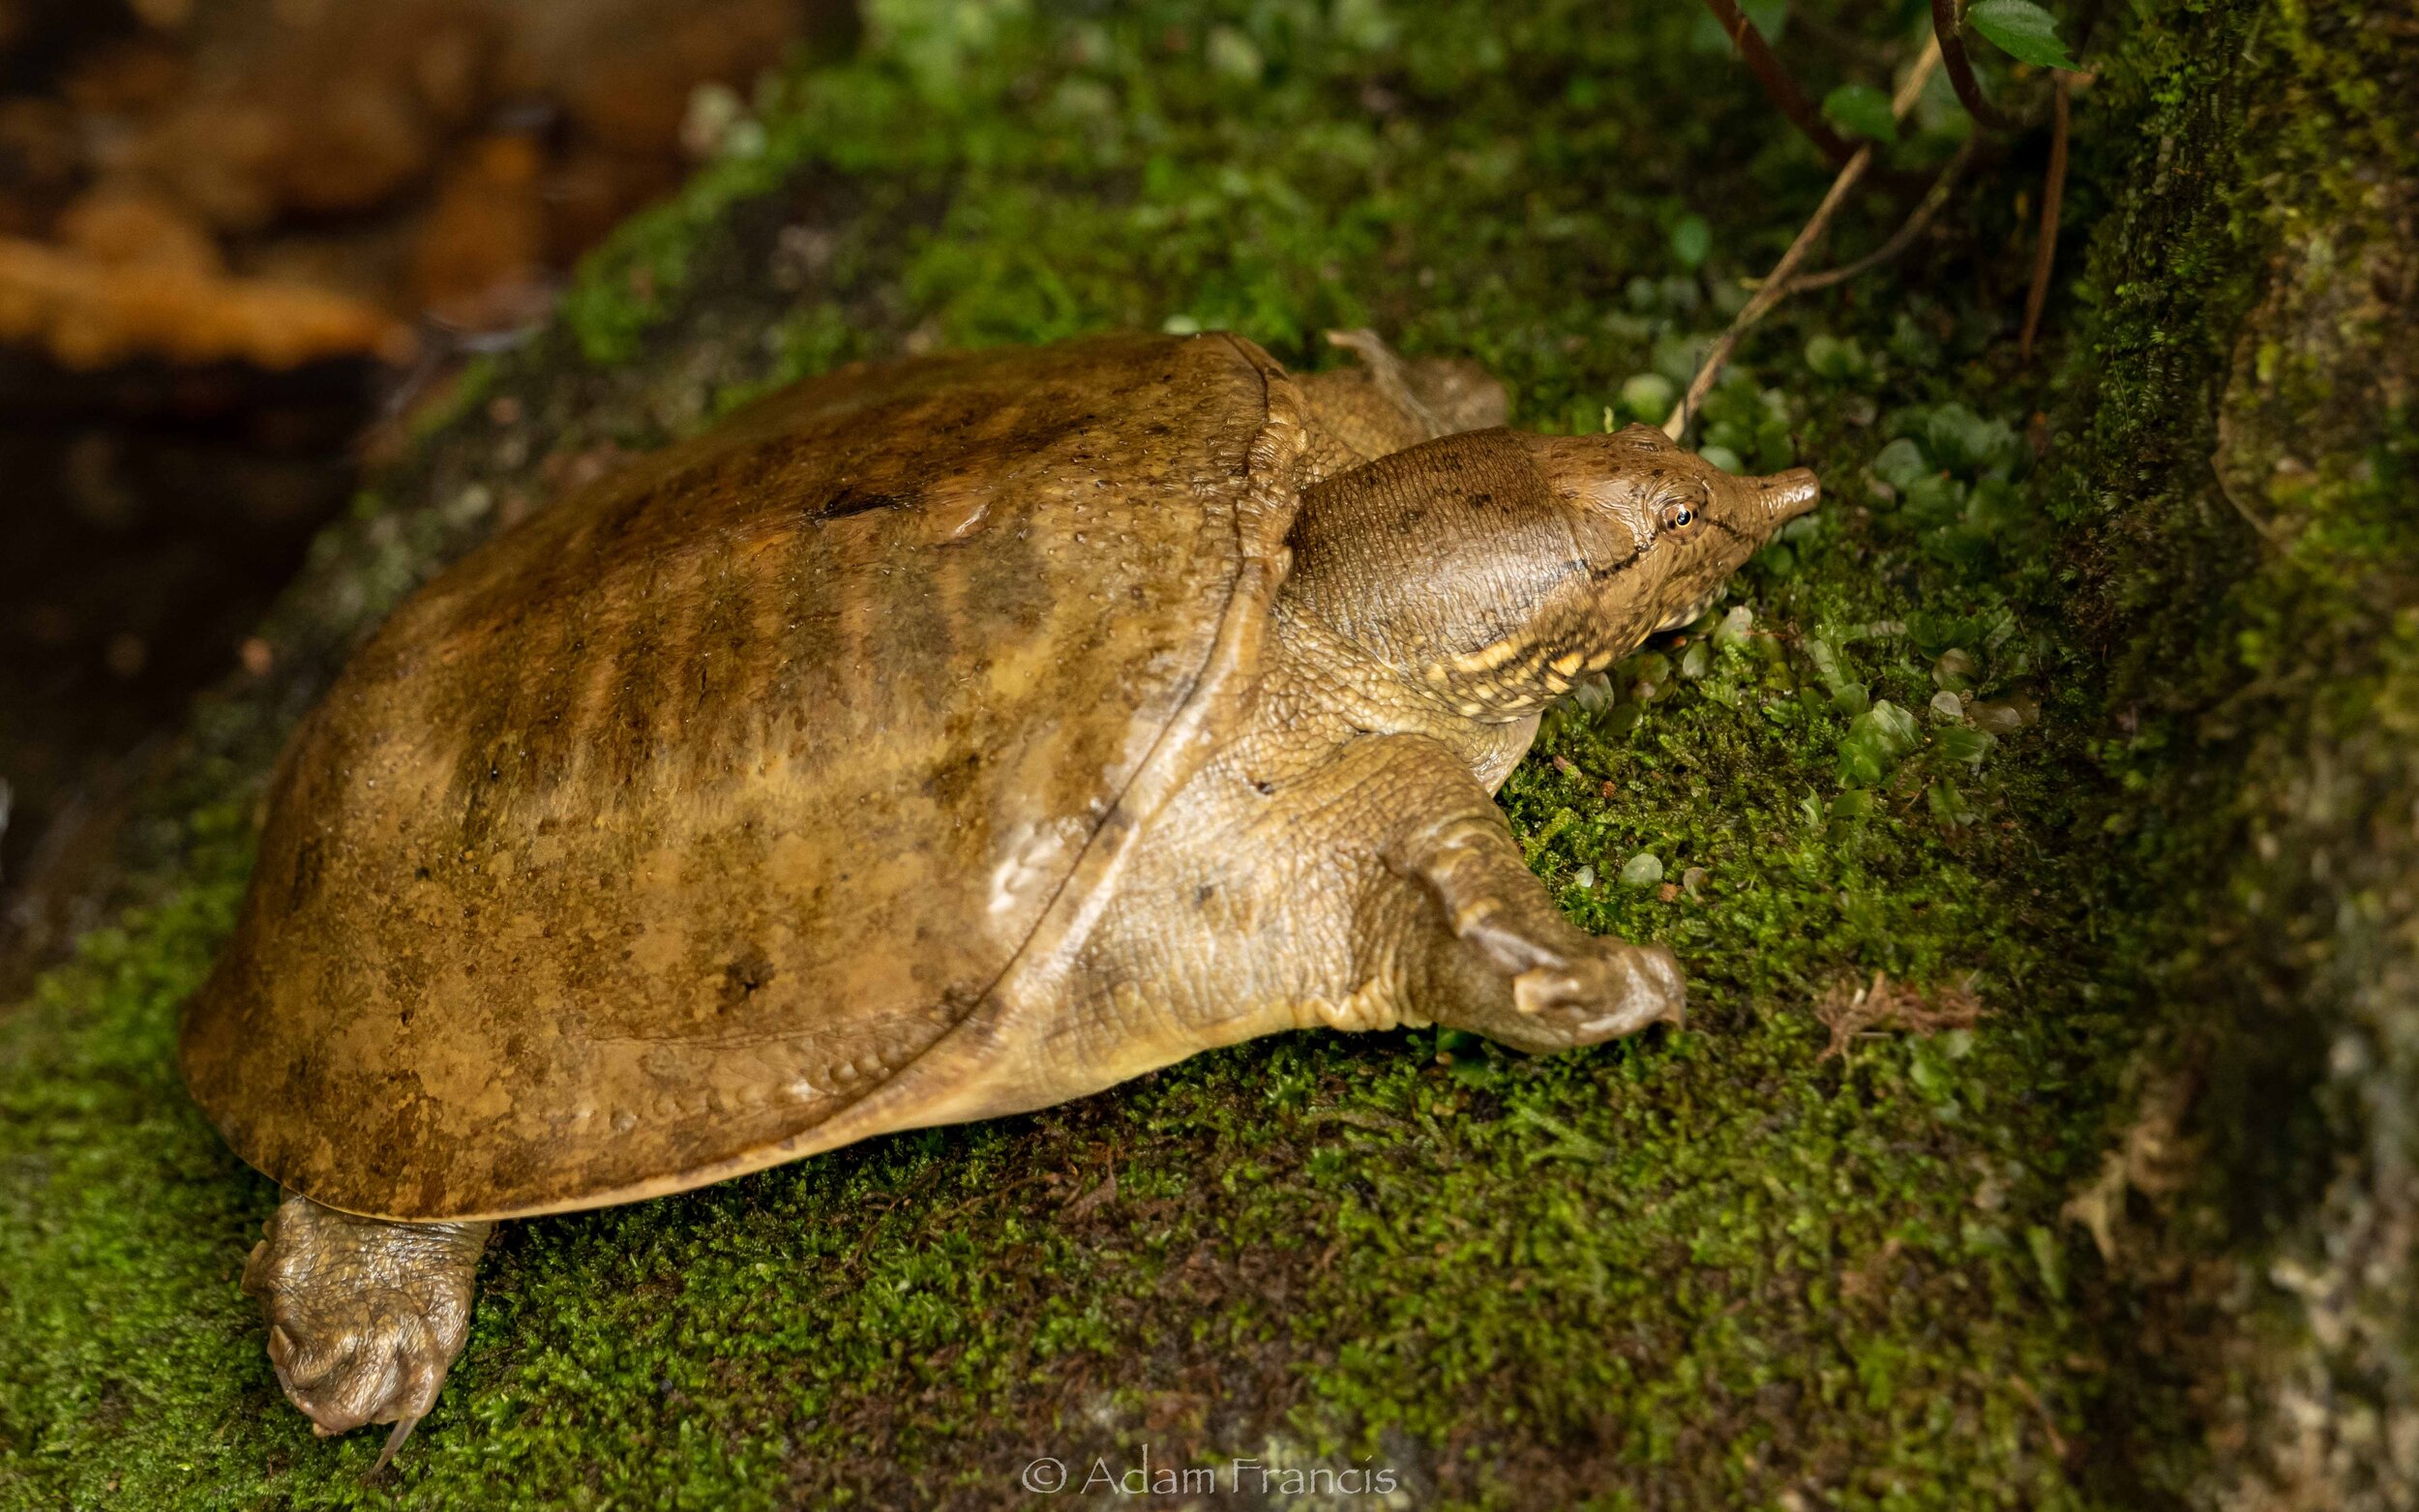 Chinese Soft Shell Turtle - Pelodiscus sinensis